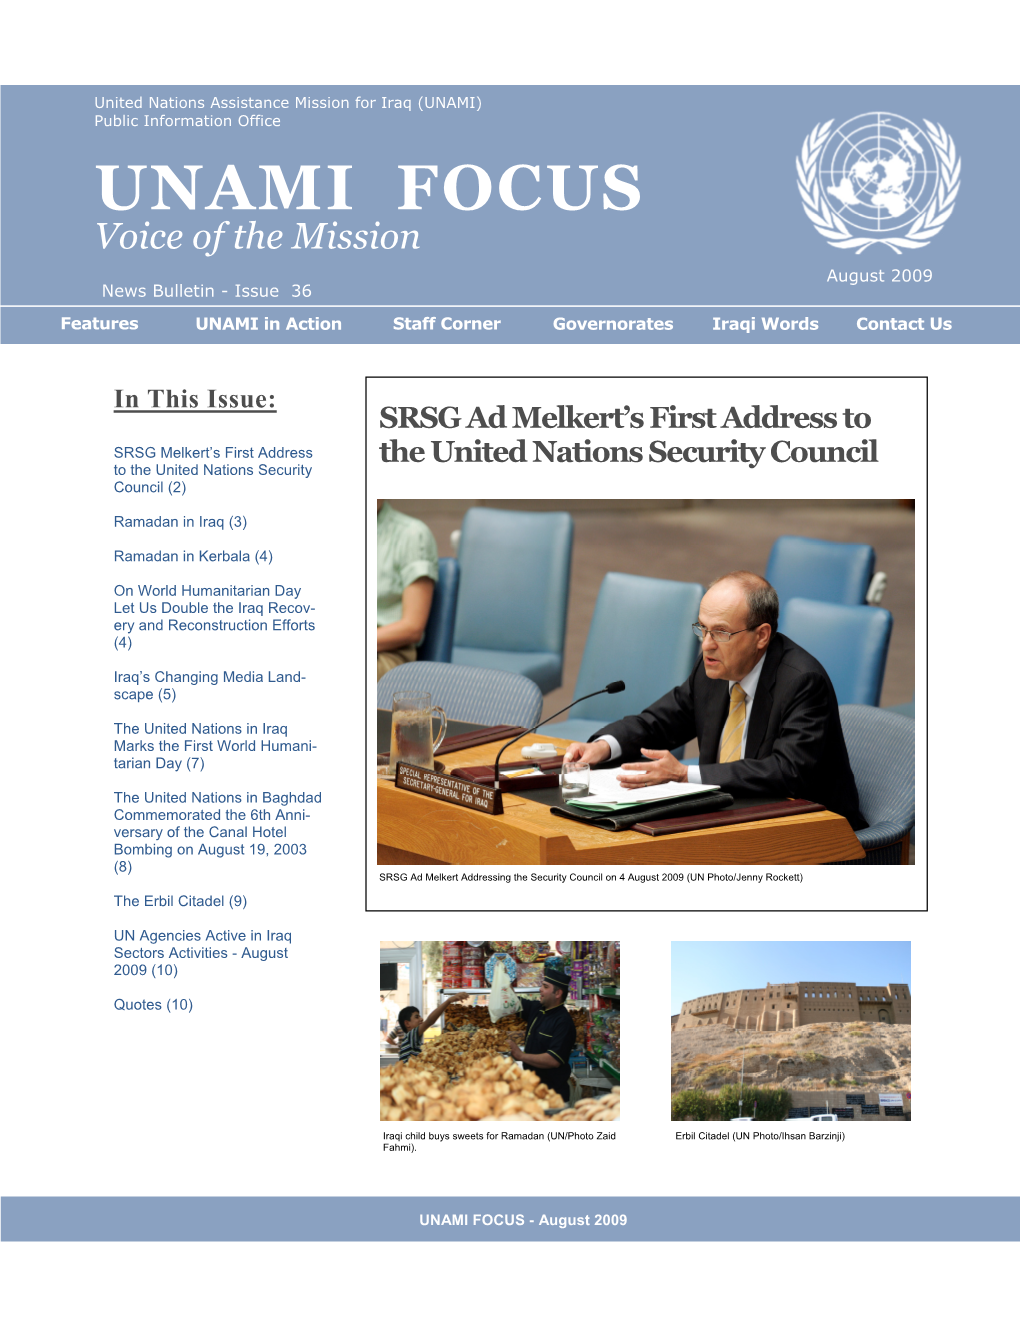 UNAMI FOCUS Voice of the Mission August 2009 News Bulletin - Issue 36 Features UNAMI in Action Staff Corner Governorates Iraqi Words Contact Us